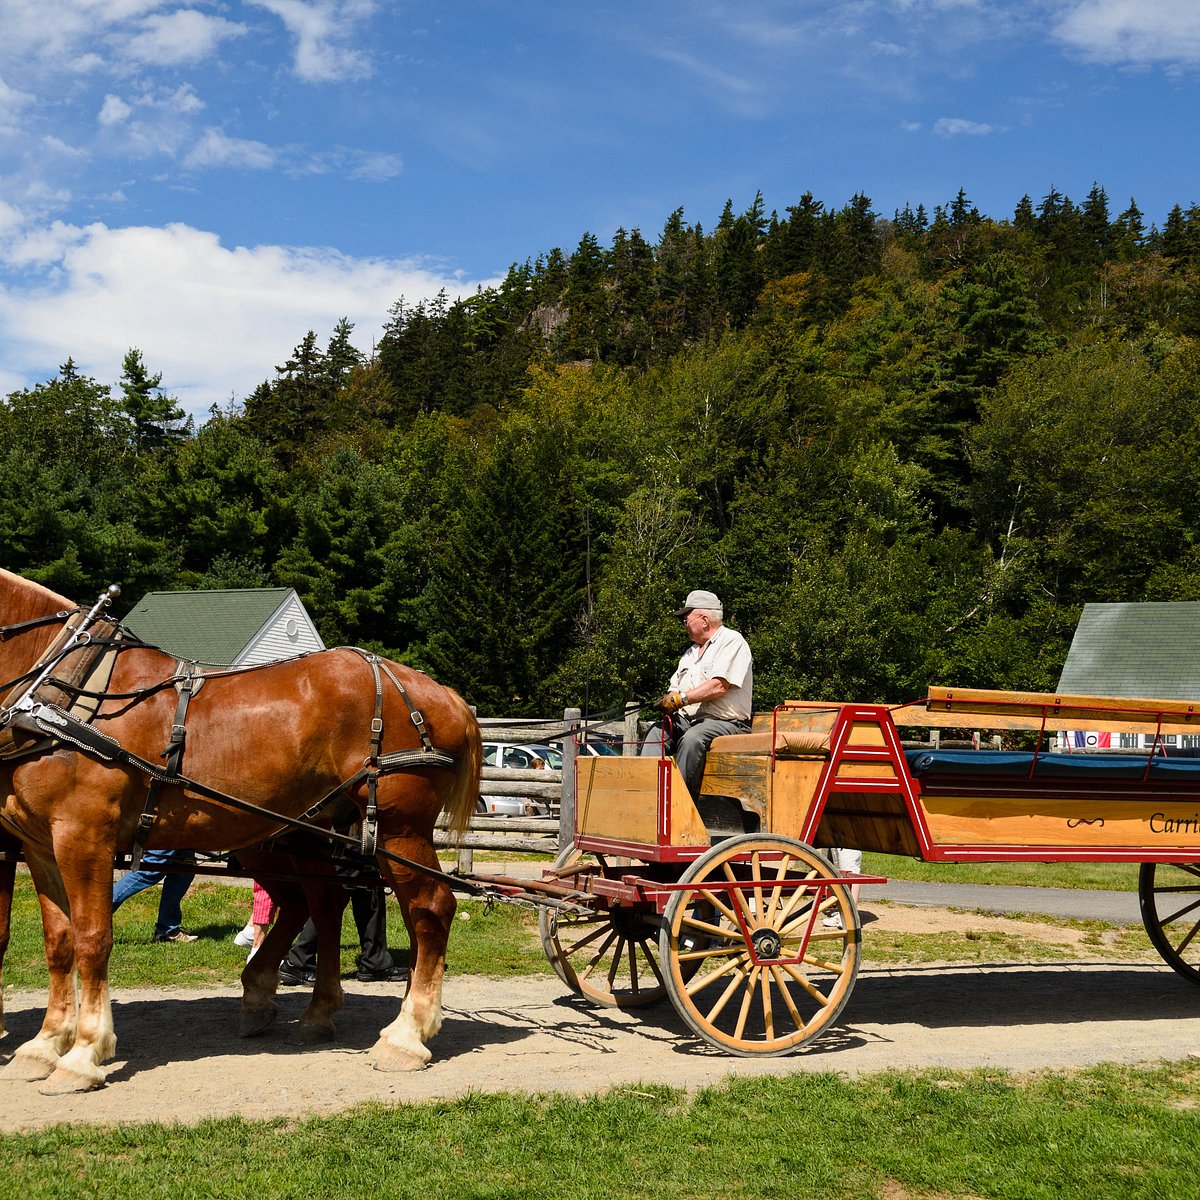 Carriages of Acadia - Home page for horse carriage rides at Acadia